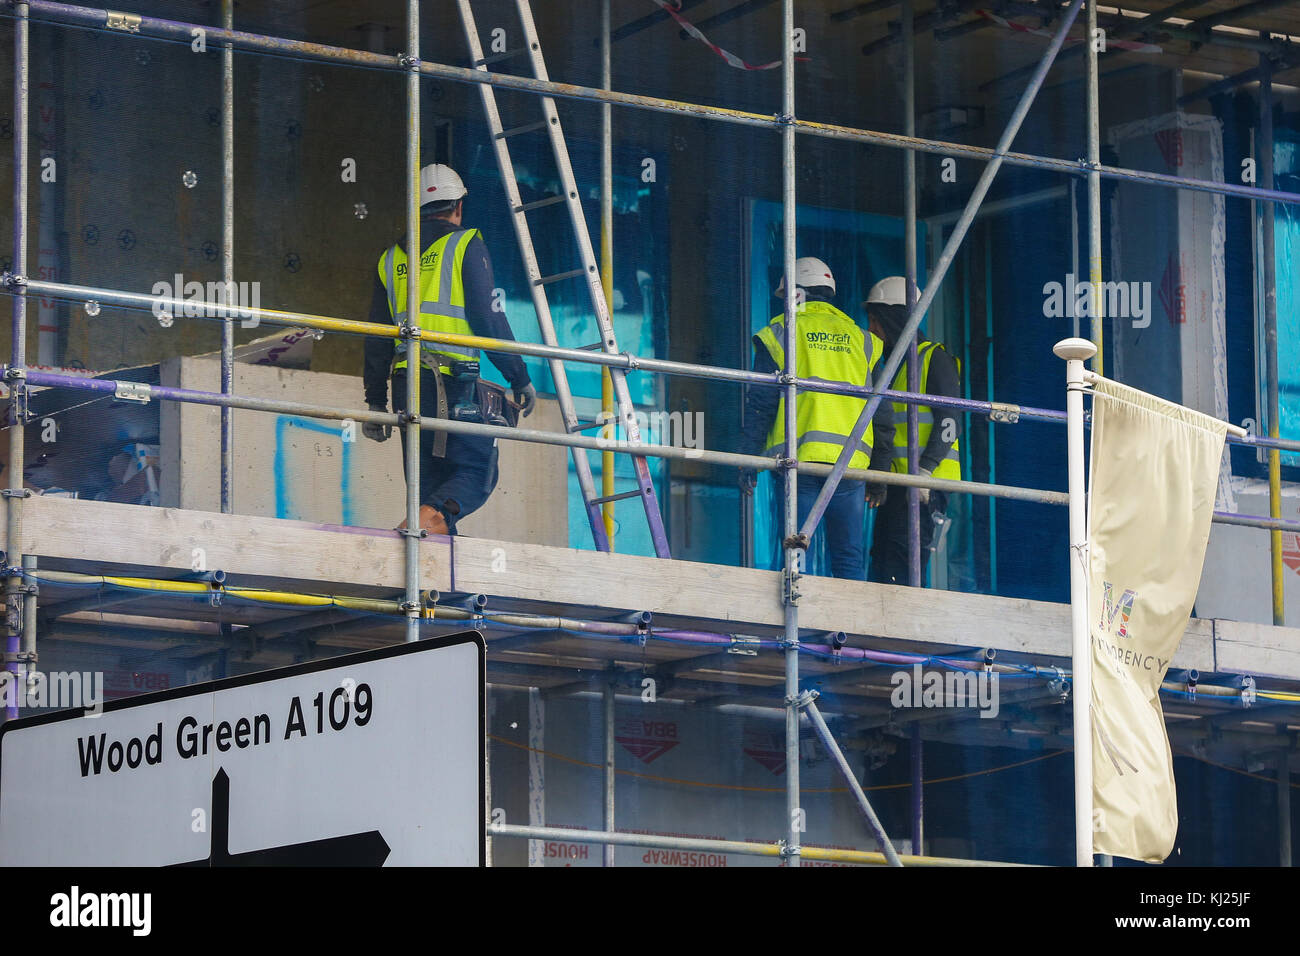 North London. UK 21 Nov 2017 - Construction workers on a new housing estate, with properties available for purchase in North London property as Britain's Chancellor of the Exchequer Philip Hammond is expected to announce plans to build 300,000 homes every year, in his autumn budget on Wednesday, 22 November 2017. It has been reported in the Sunday Times newspaper that Philip Hammond will do 'whatever it takes' to meet this target. Stock Photo